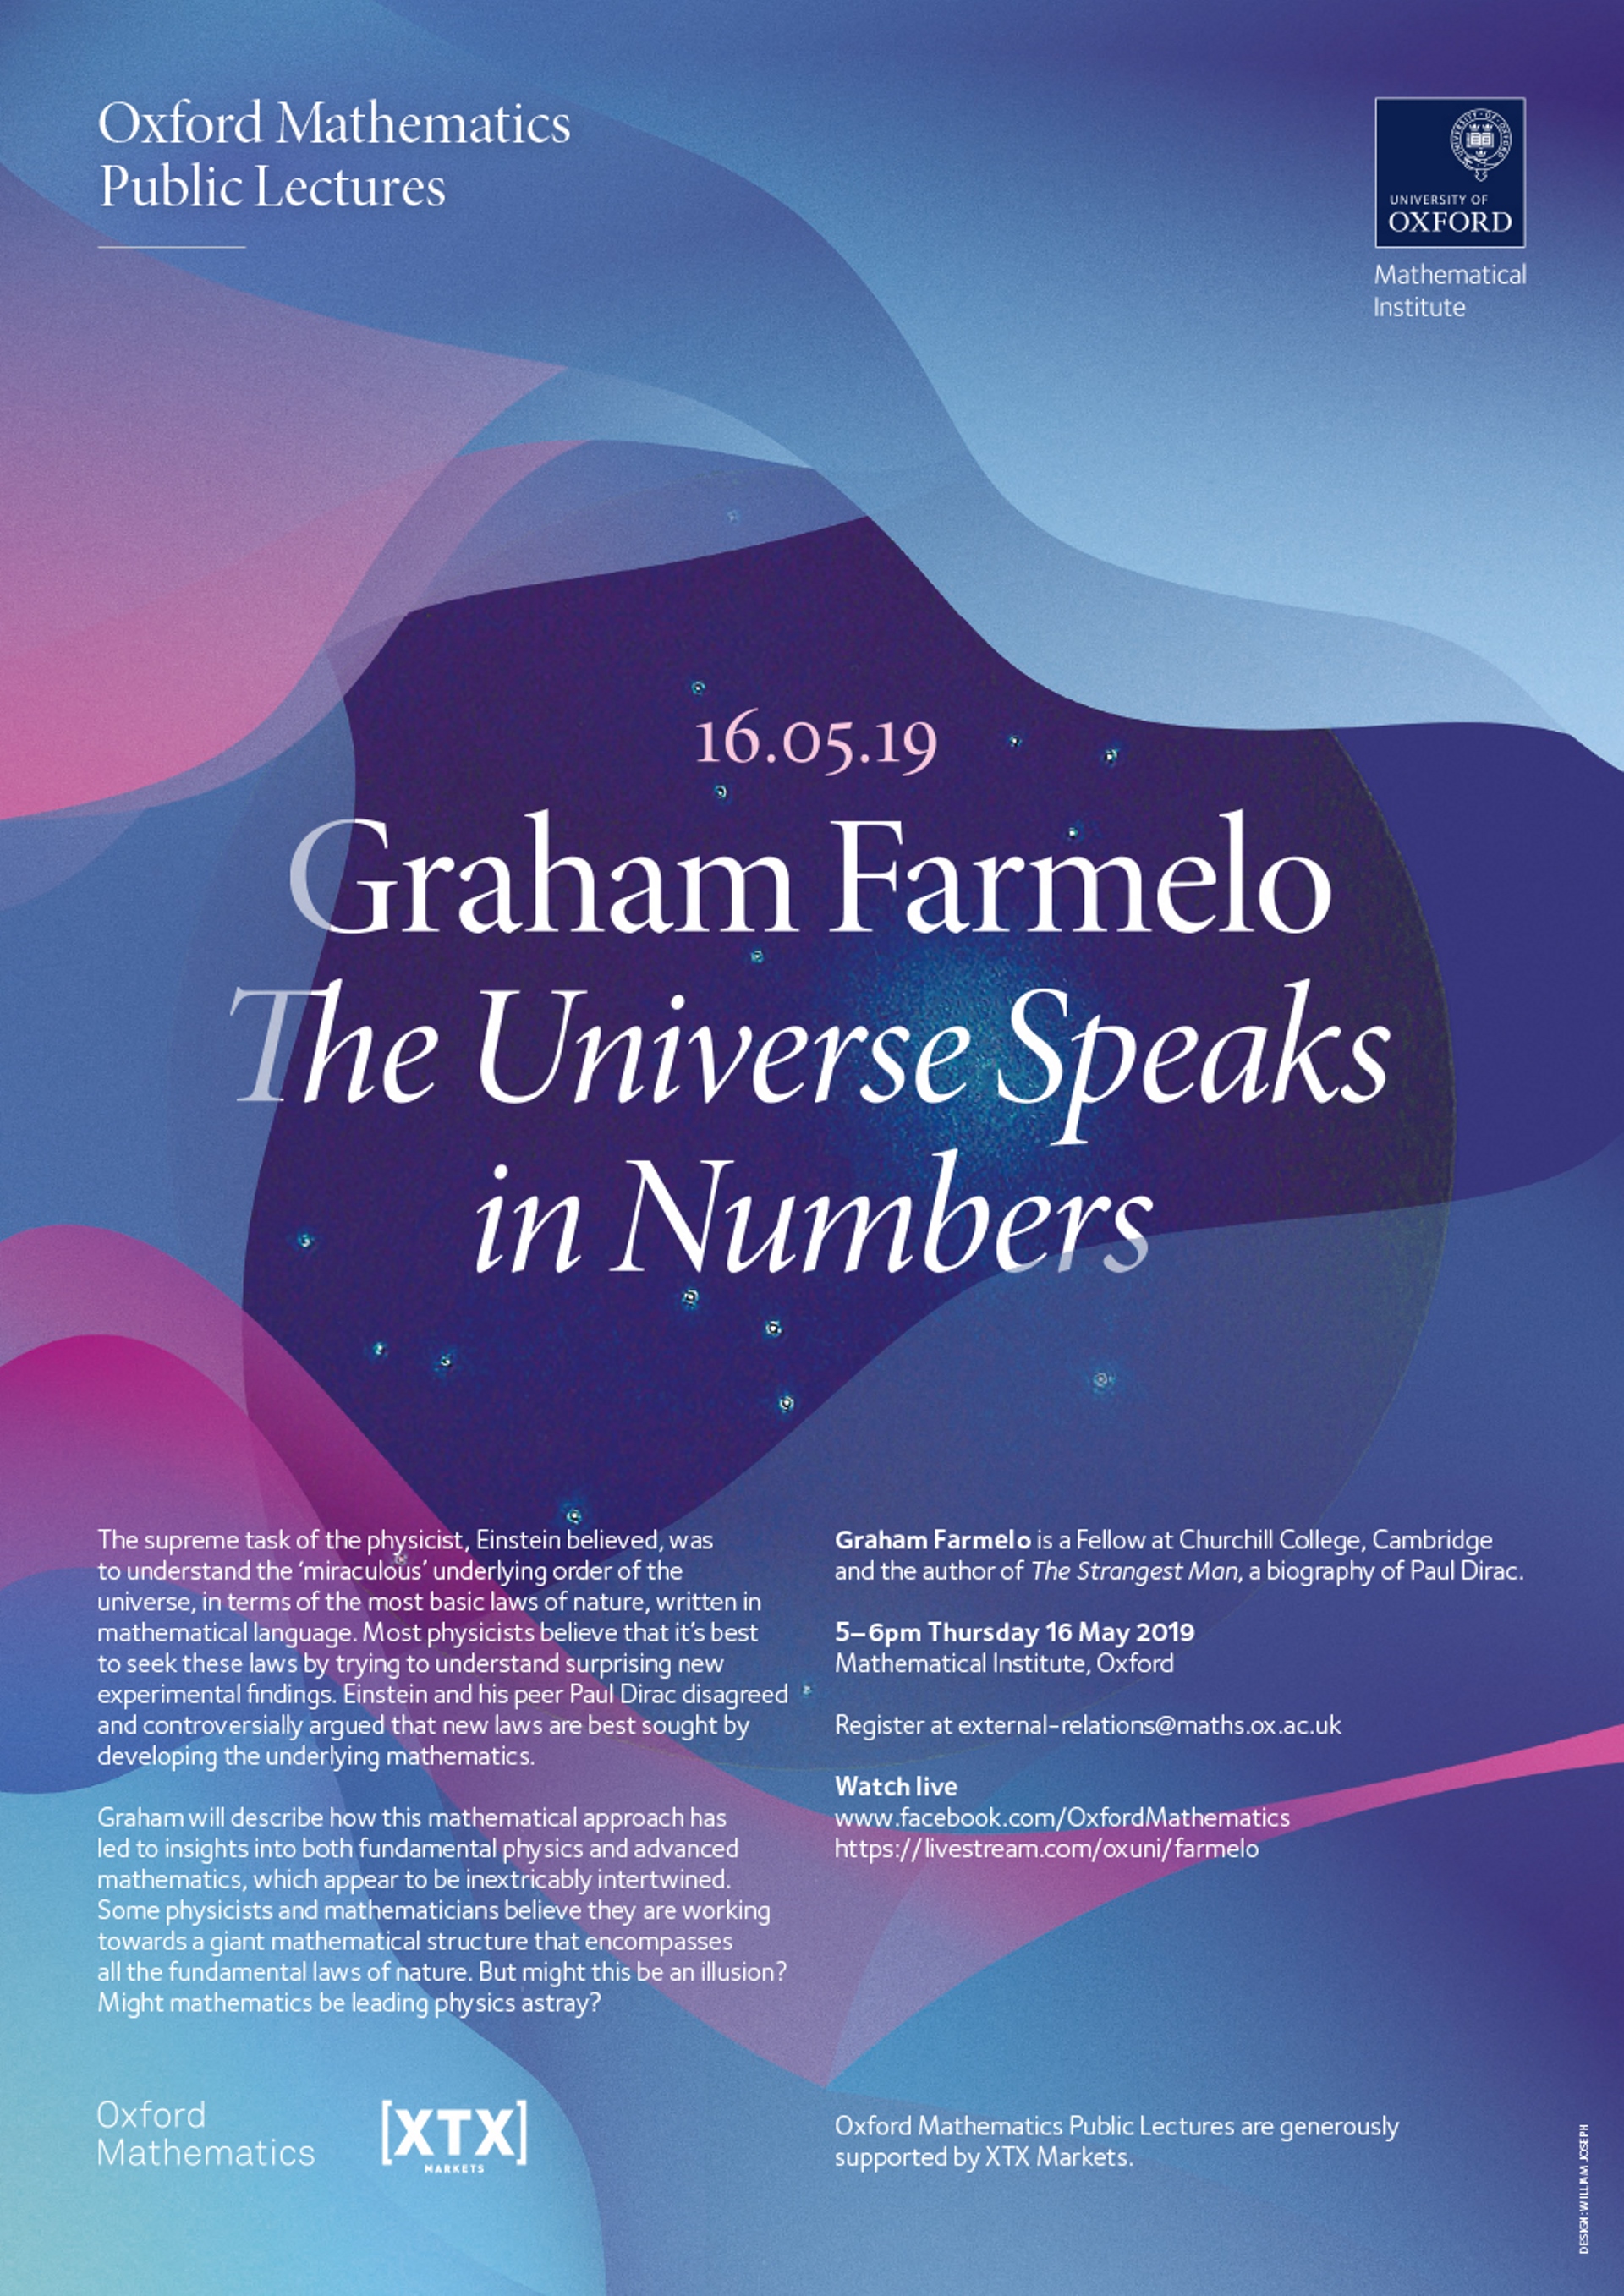 Posters for Public Lectures Mathematical Institute